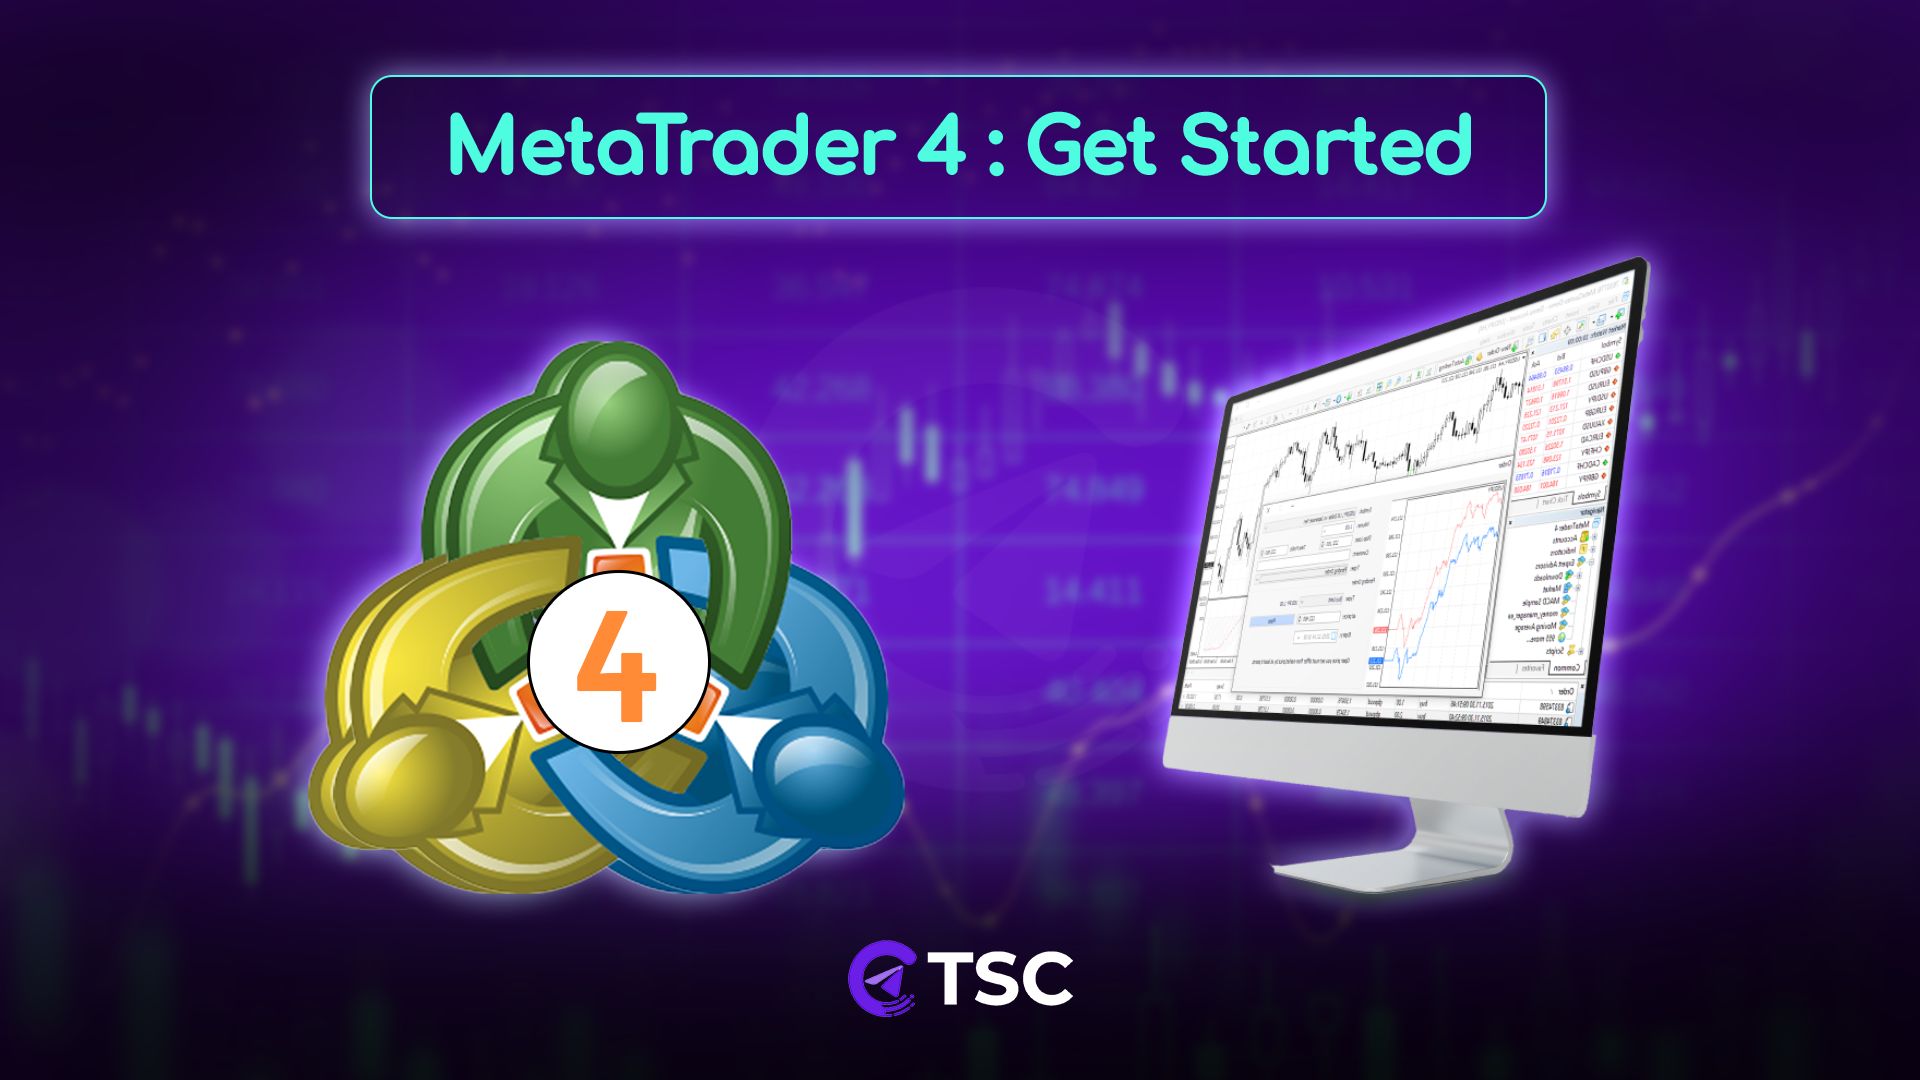 Meta Trader 4 getting started image with icon, monitor and text.